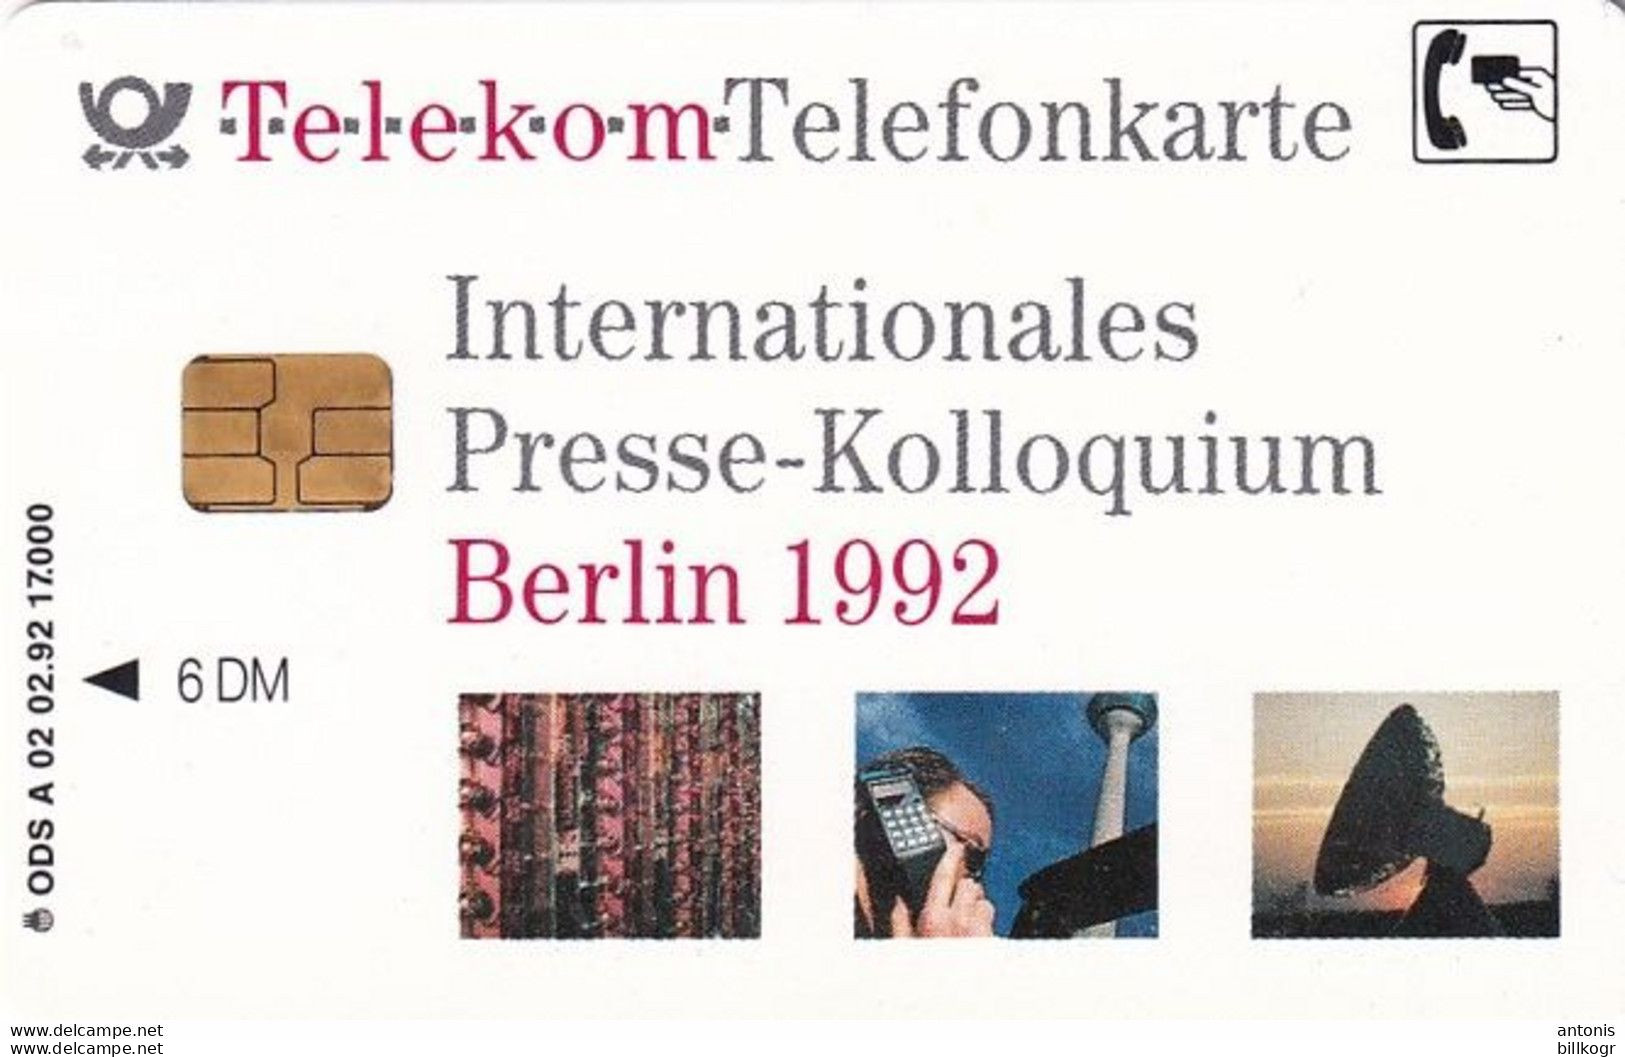 GERMANY - Internationales Presse-Kolloquium, Berlin 1992(A 02), Tirage 17000, 02/92, Used - A + AD-Series : Publicitaires - D. Telekom AG